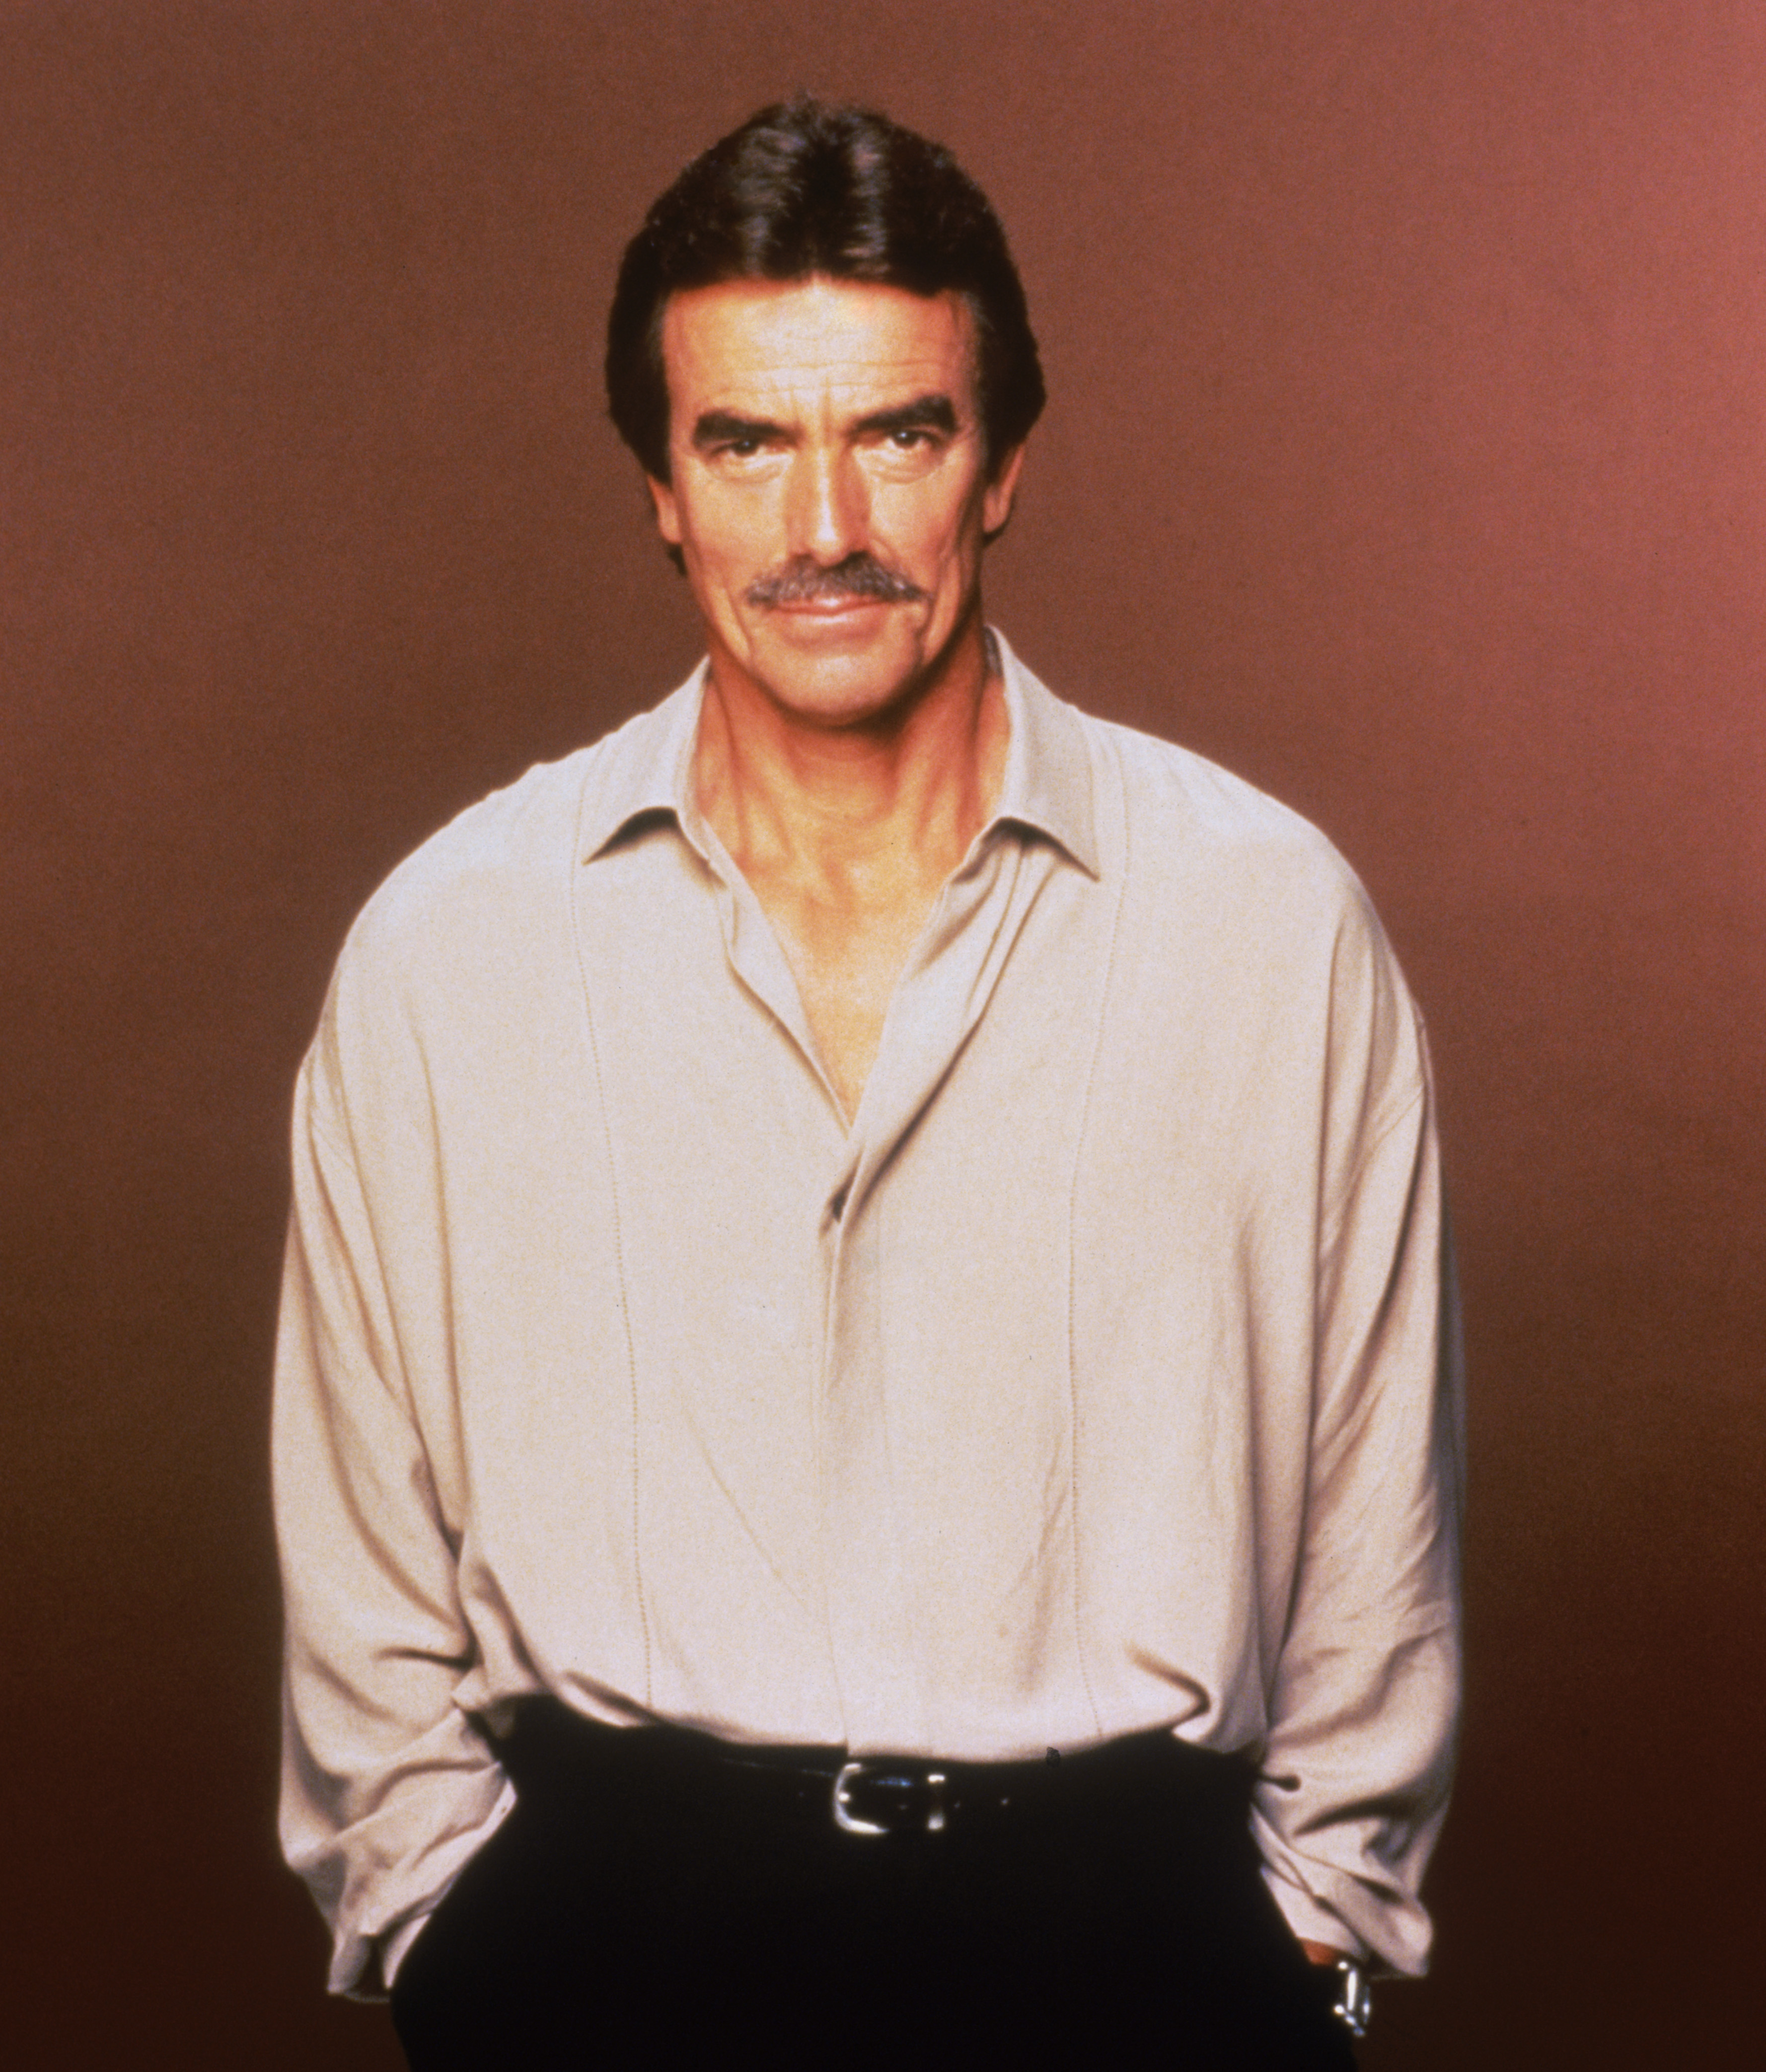 Eric Braeden stars as Victor Newman in the long-running American TV soap "The Young and the Restless." | Source: Getty Images